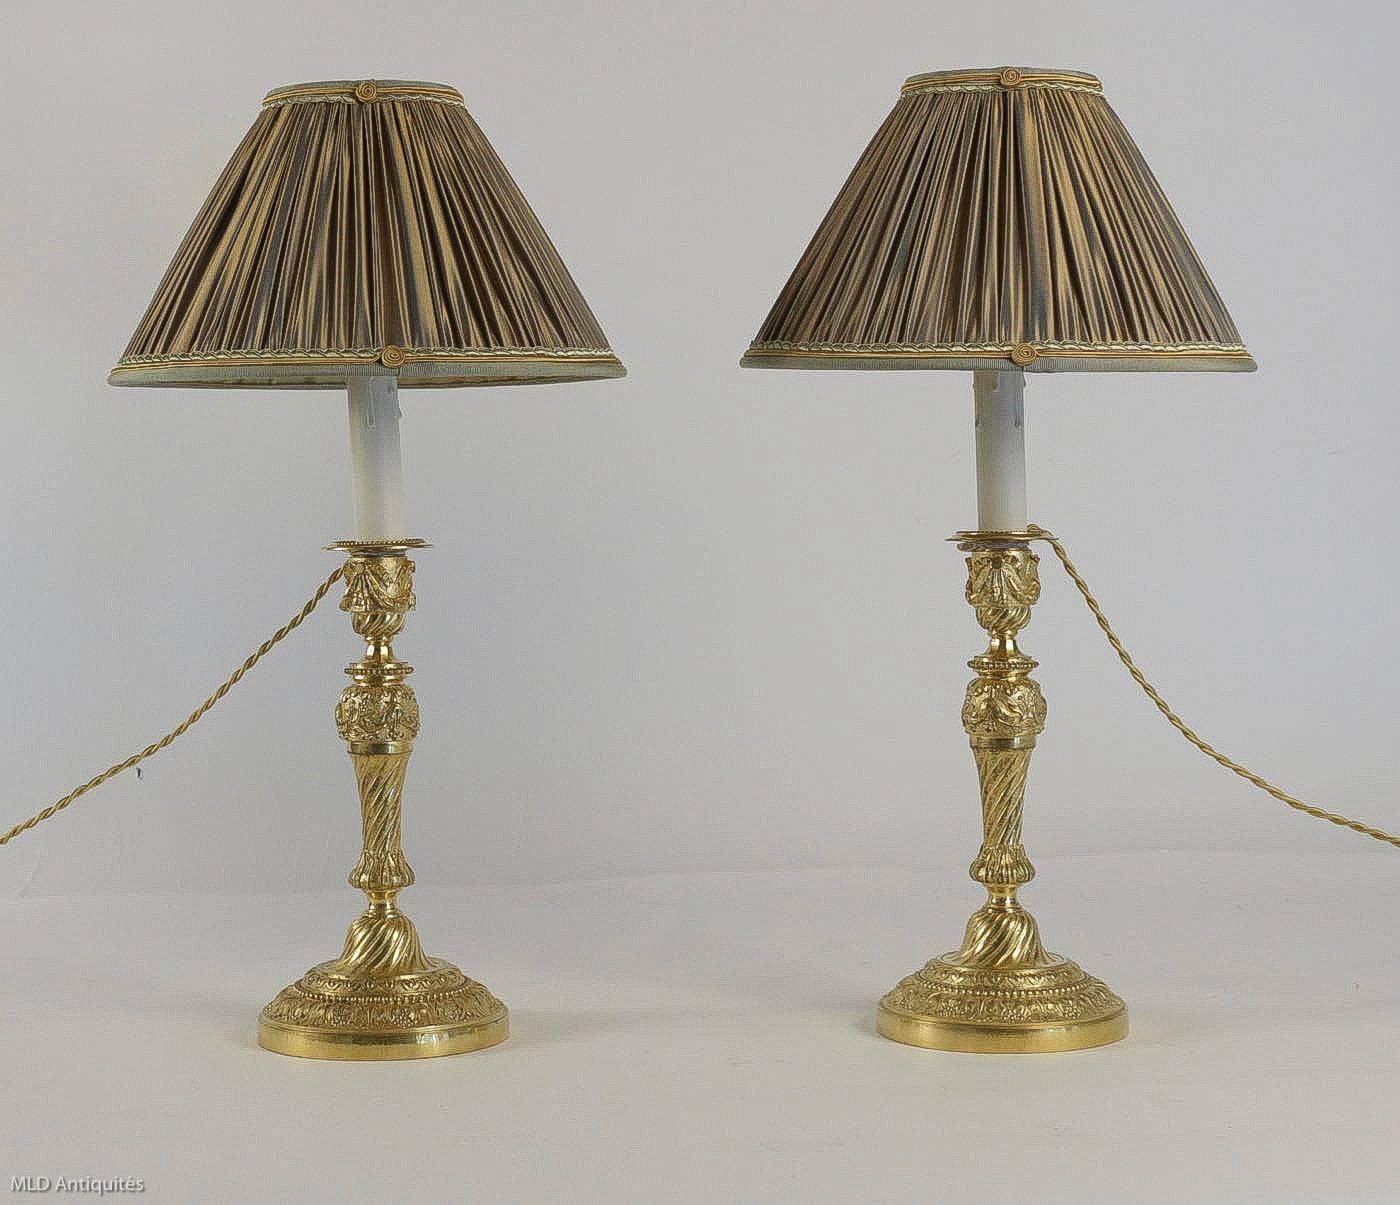 Pair of lovely French Louis XVI period, original mercure gilt bronze candlesticks, very finely chiselled with foliage’s, grapes, water pearls, converted to table lamps, with new French pleated changeable beige colour silk lamp shades.

French work